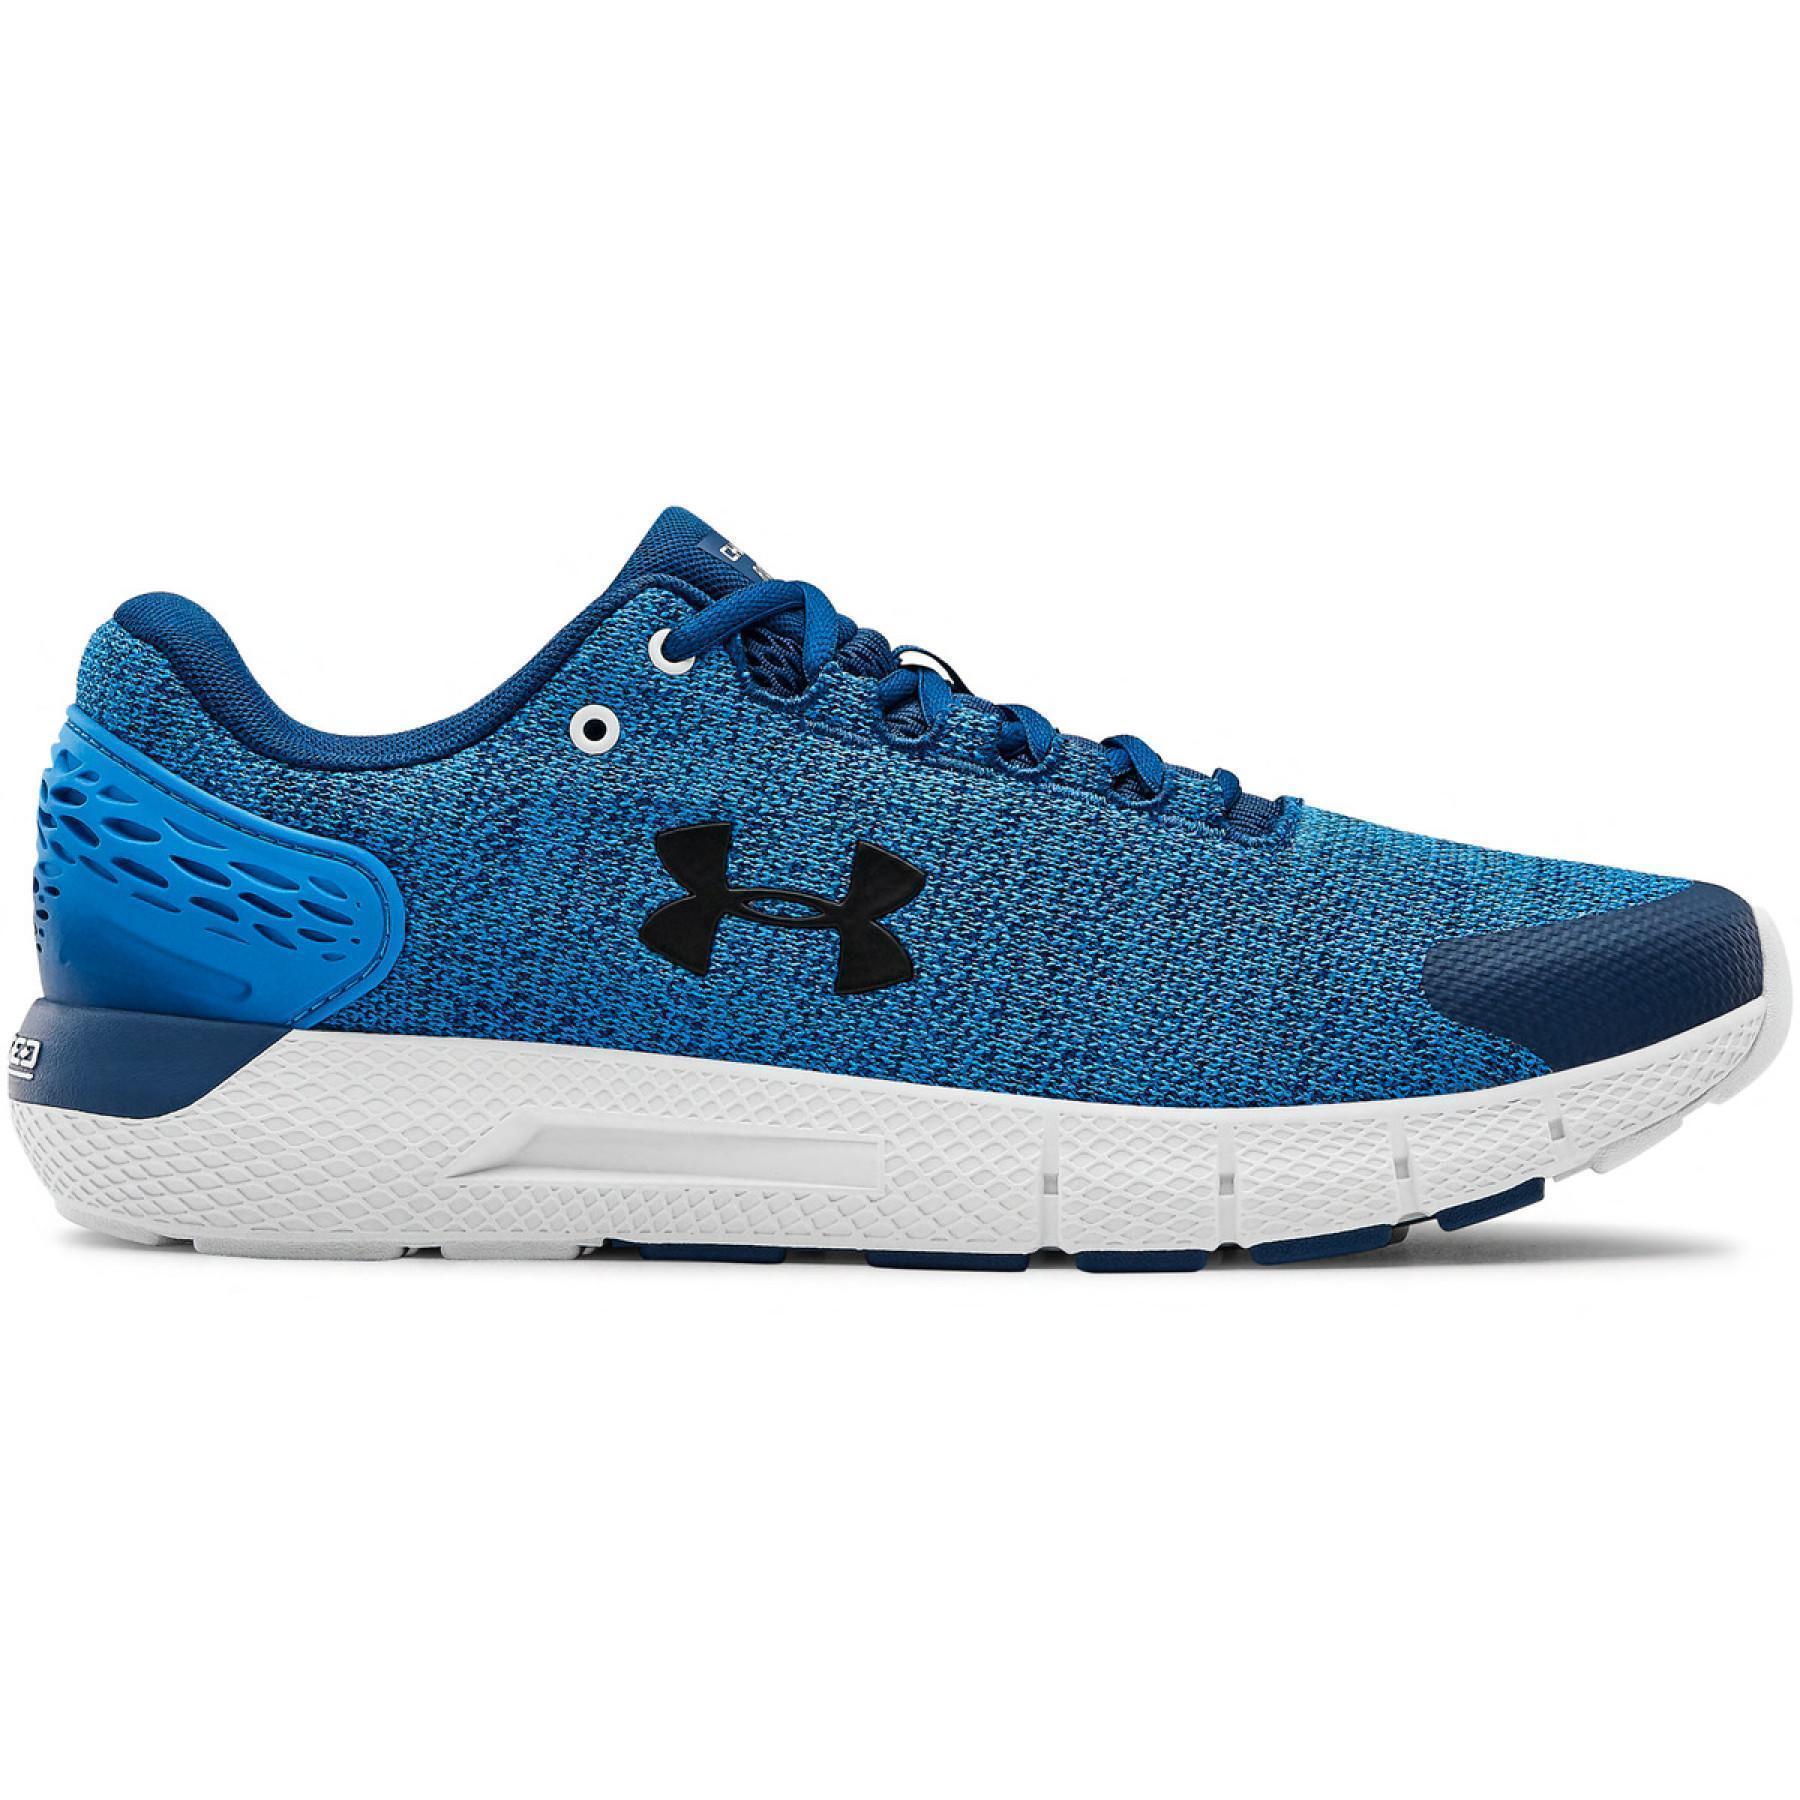 Zapatillas para correr Under Armour Charged Rogue 2 Twist